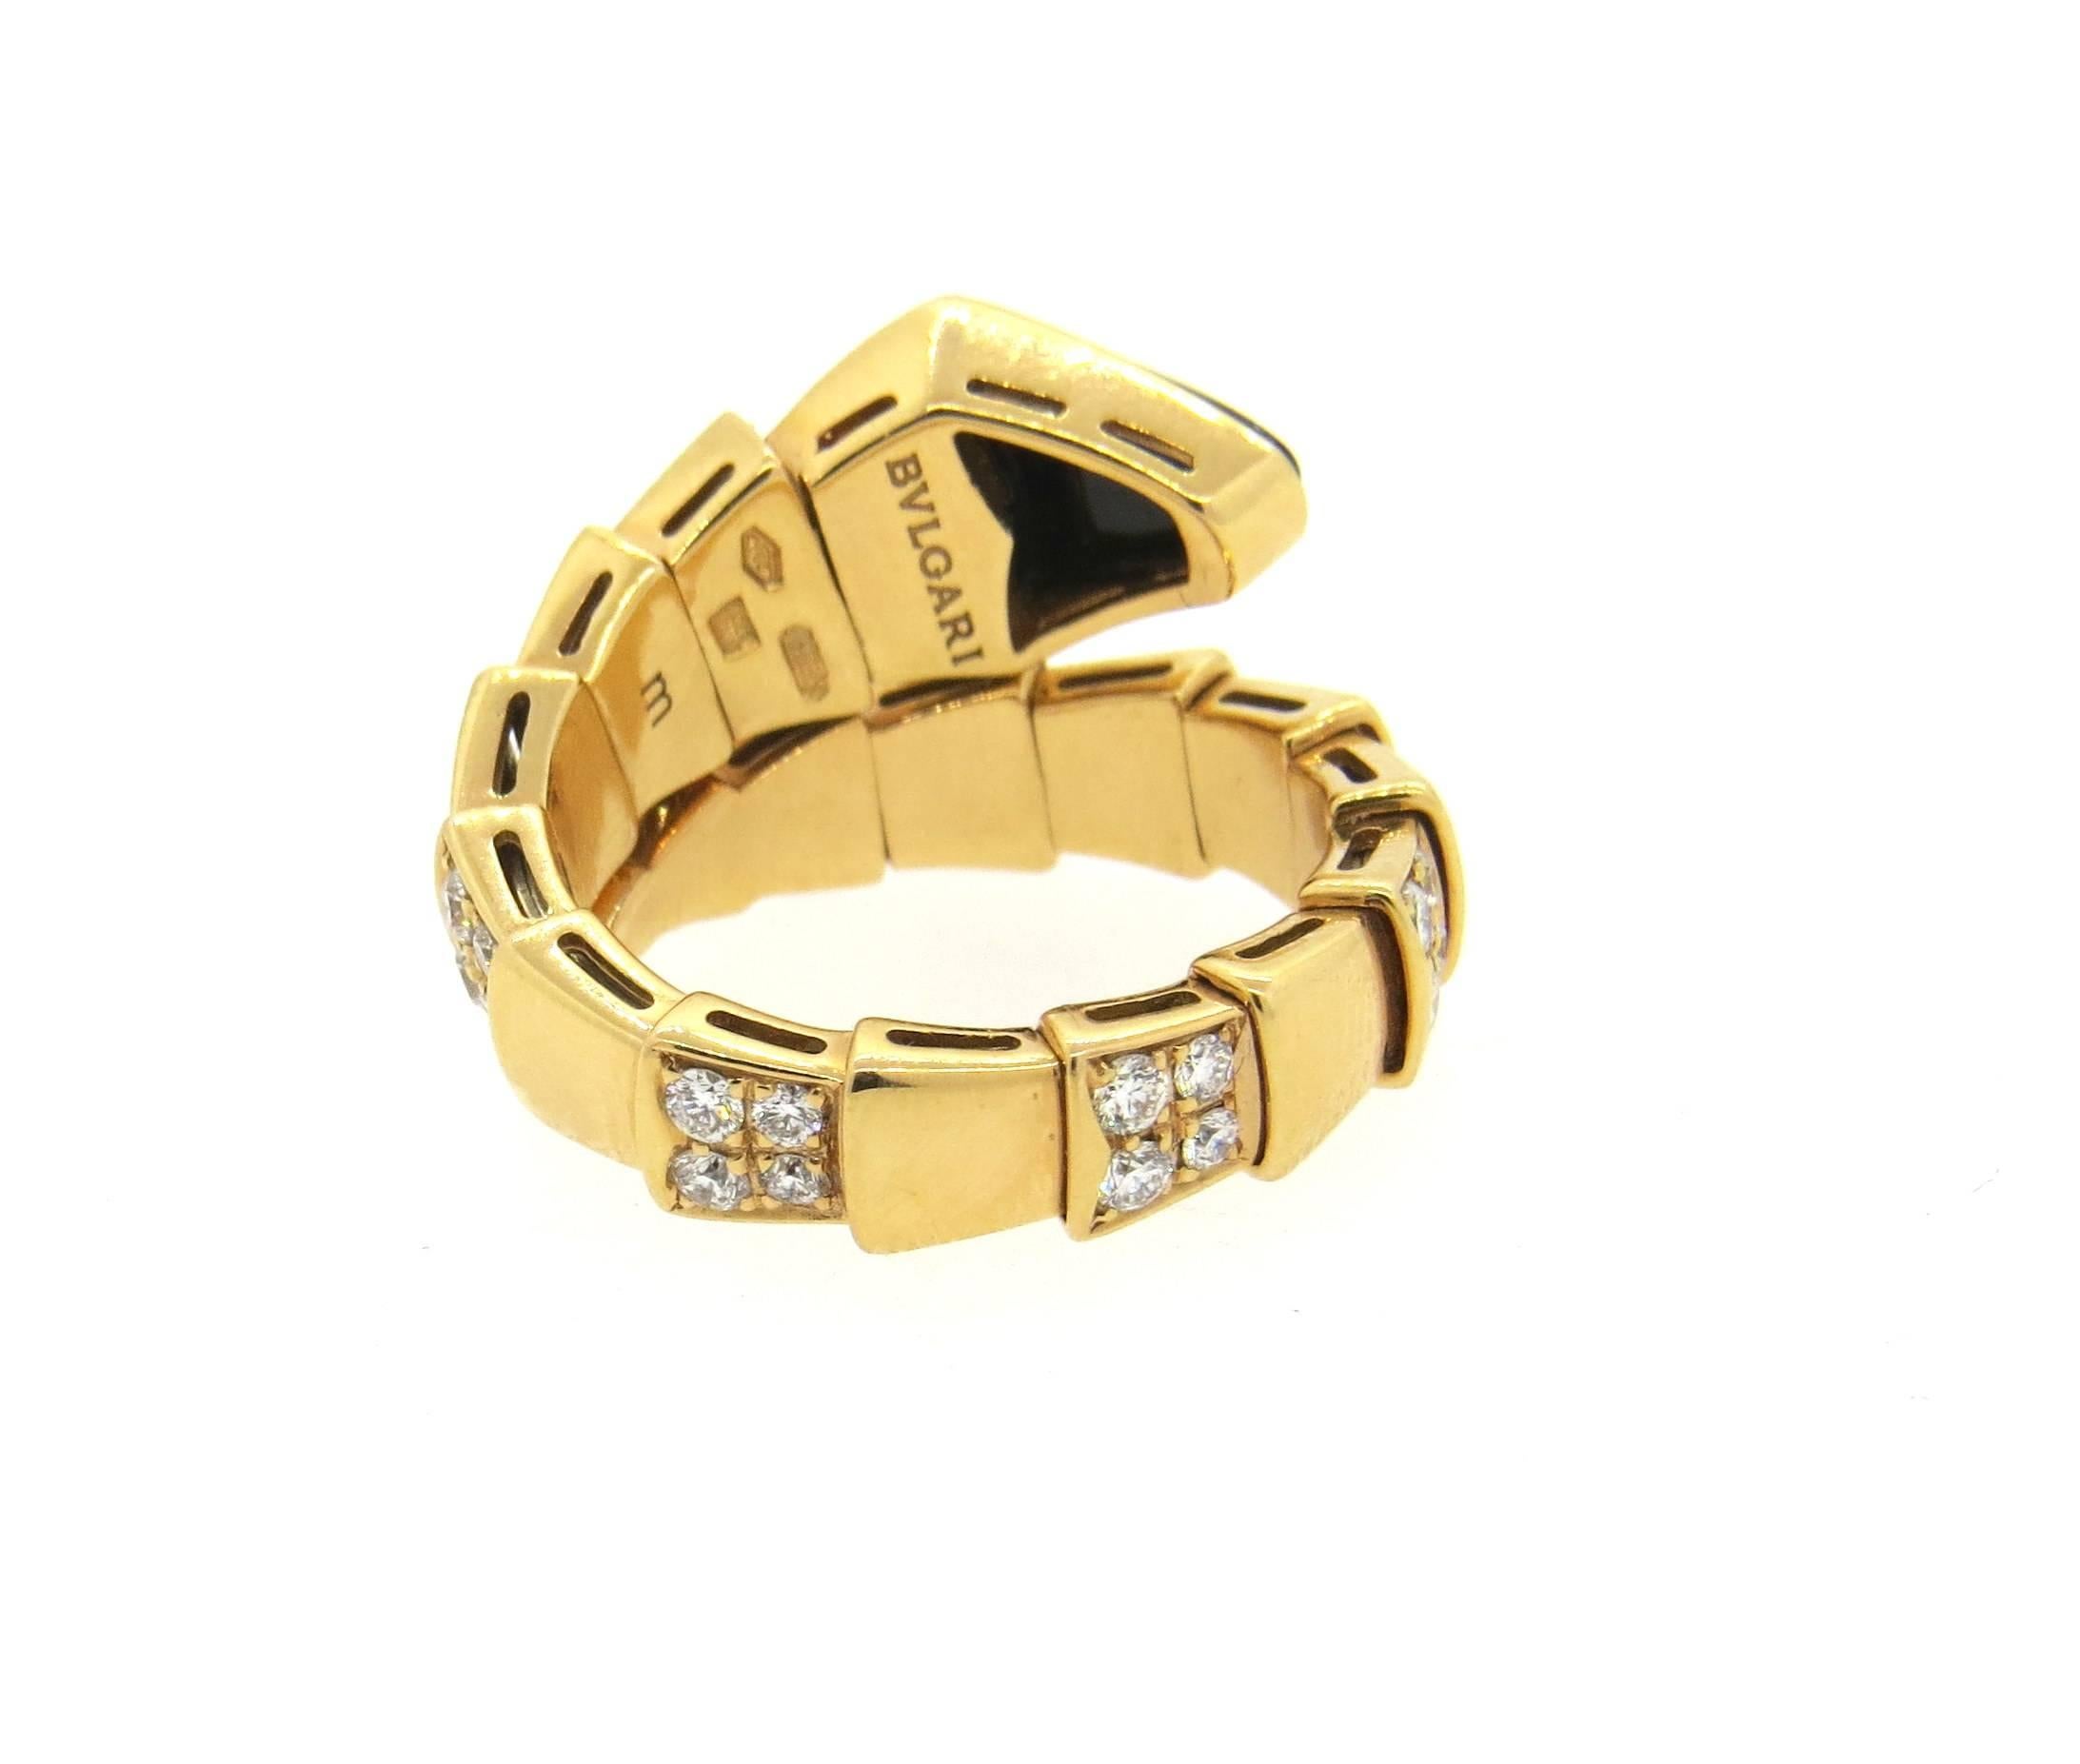 New 18k rose gold wrap ring, crafted by Bulgari for Serpenti collection, set with onyx and approximately 1.50ctw in G/VS diamonds. Ring is a size 6 1/2 - 7 (slightly flexible) . Ring top is 14mm wide. Marked : Bvlgari, m, 750, Italian gold marks.